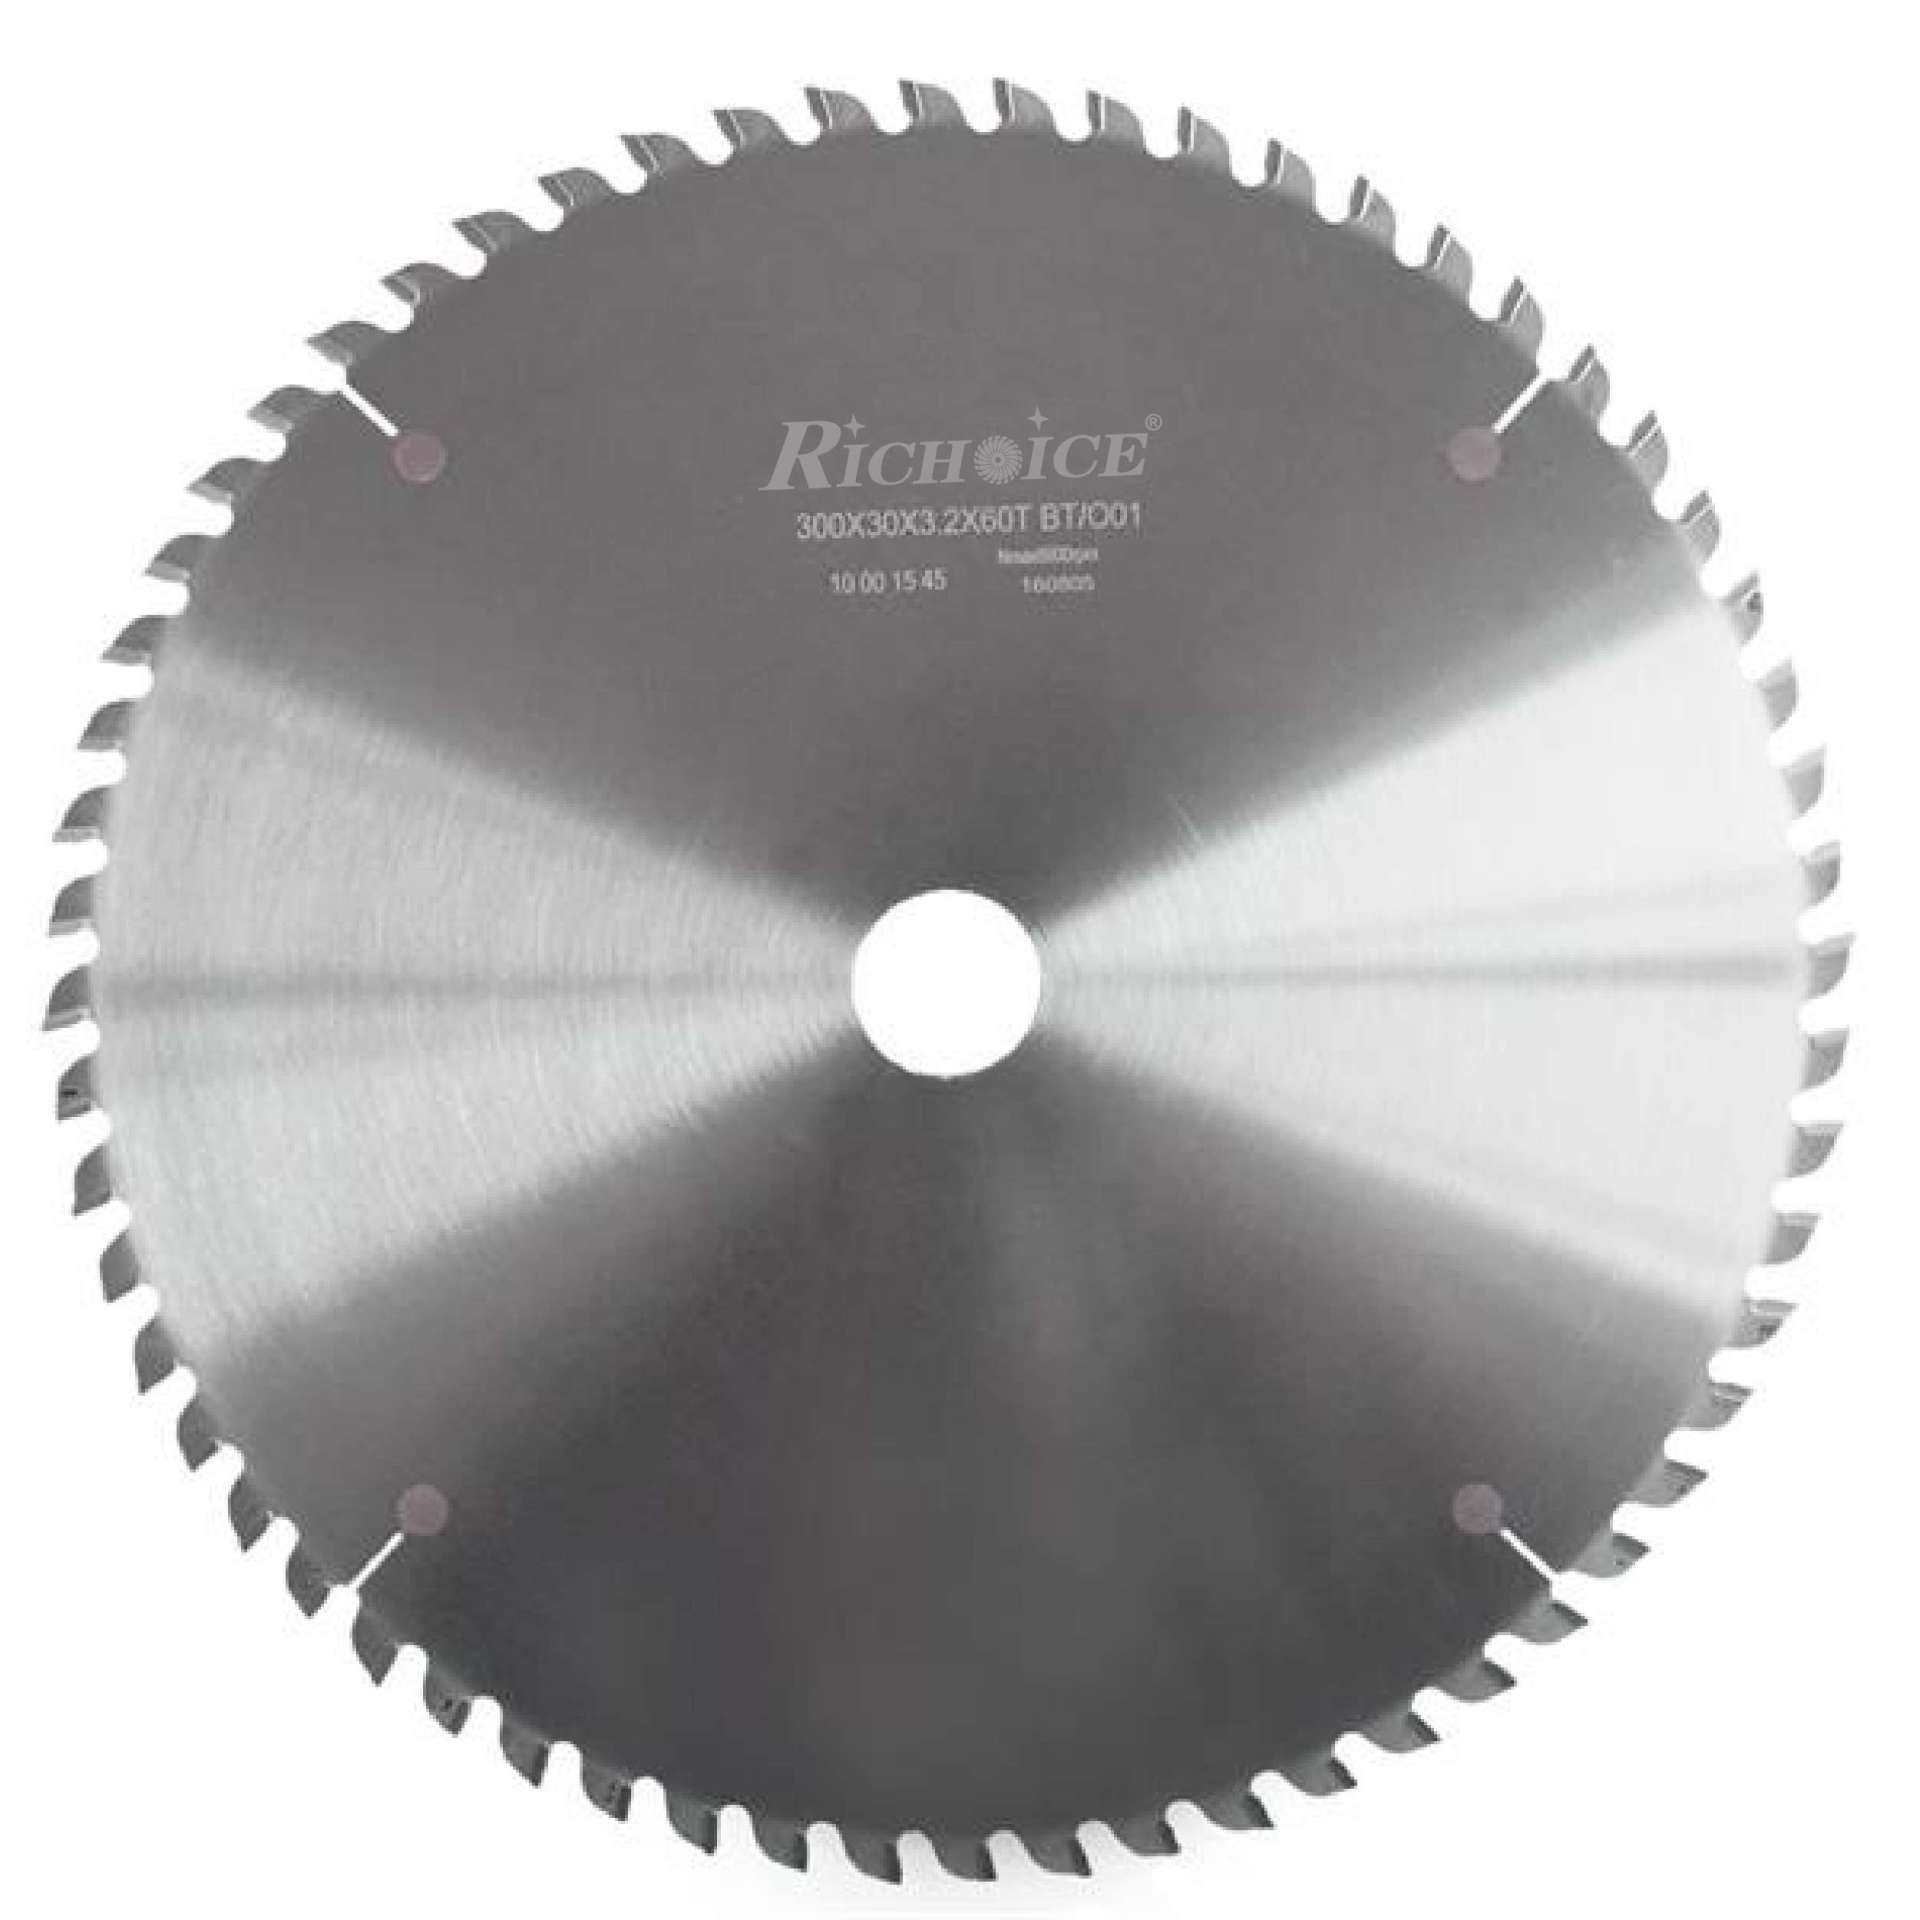 Richoice Cross and Ripping Cutting Wood TCT Saw Blade Cross And Ripping Wood Cutter